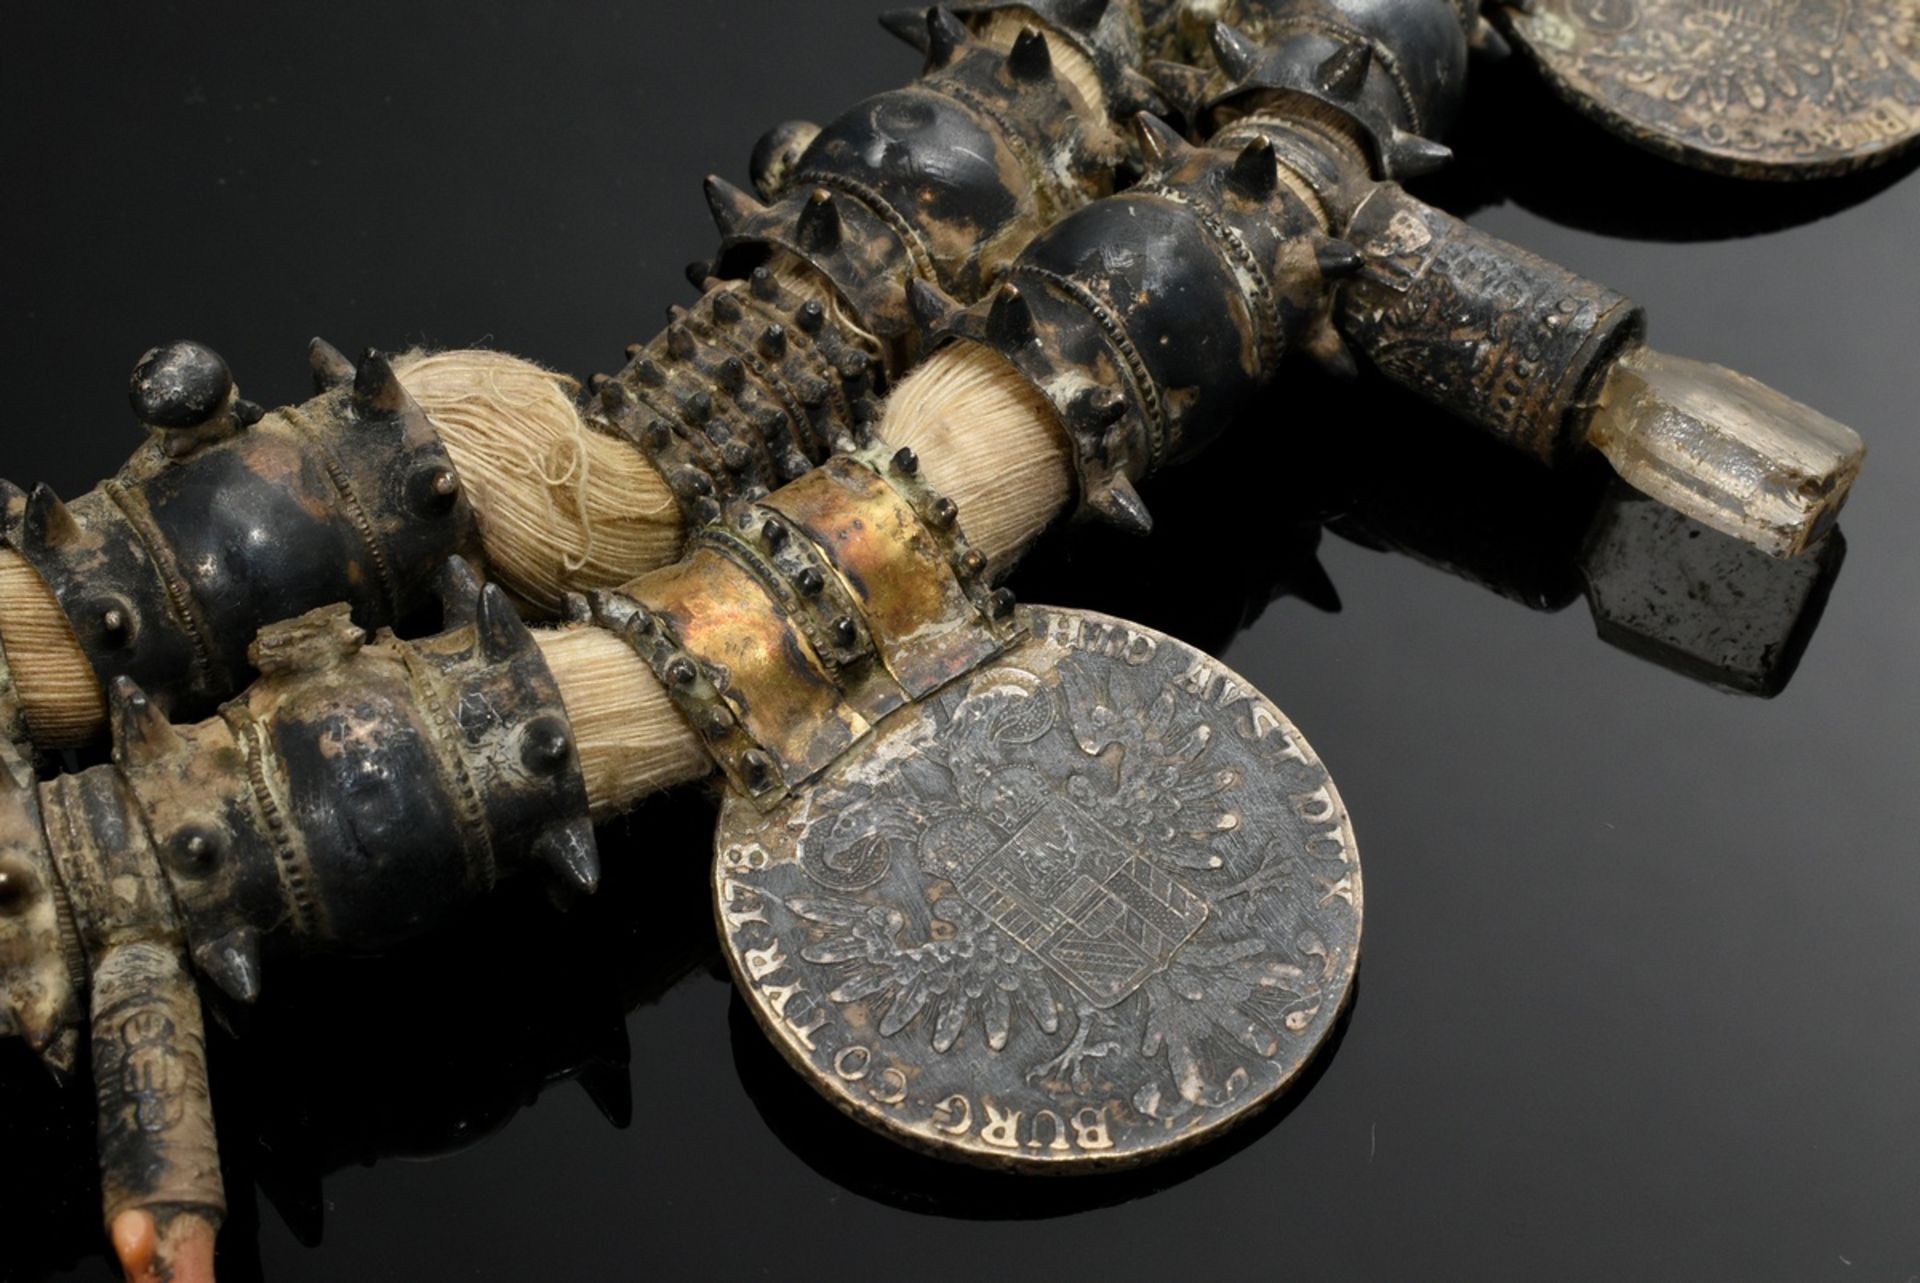 2 Various necklaces "Hirz" or "Sumpt", Oman Wahiba sand Bedouins, large spiked beads with Maria The - Image 8 of 14